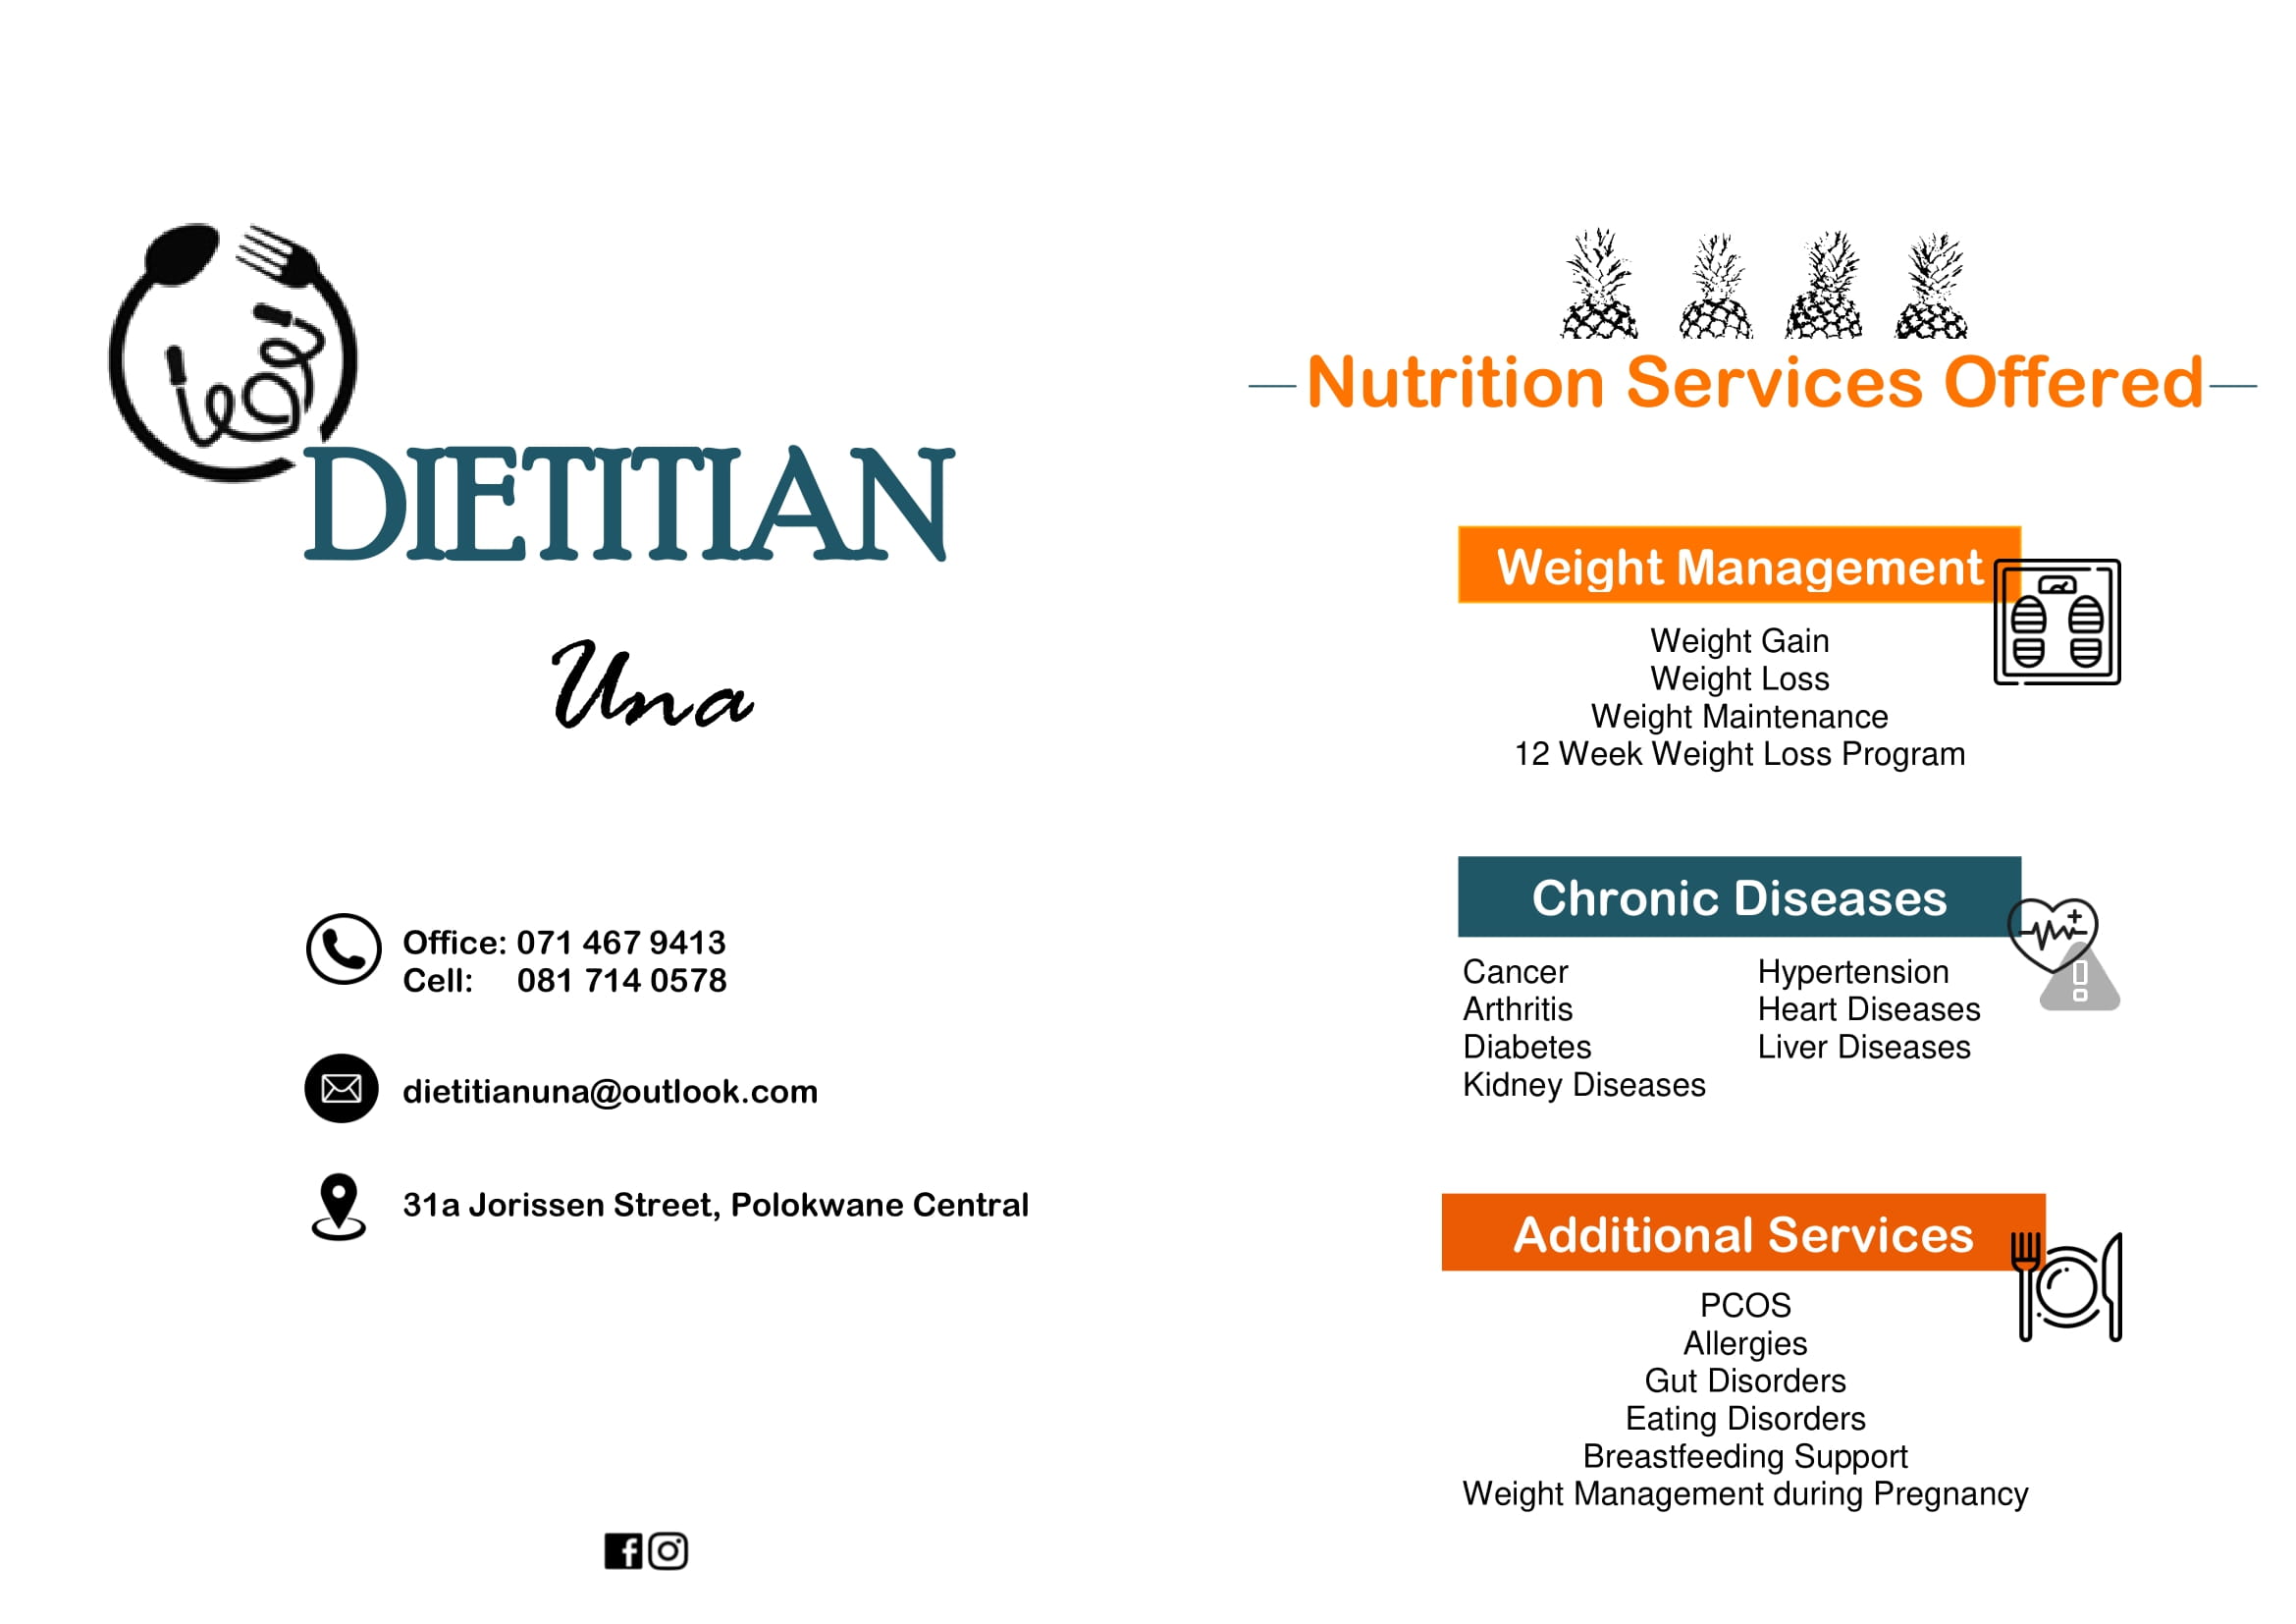 Our dietary services